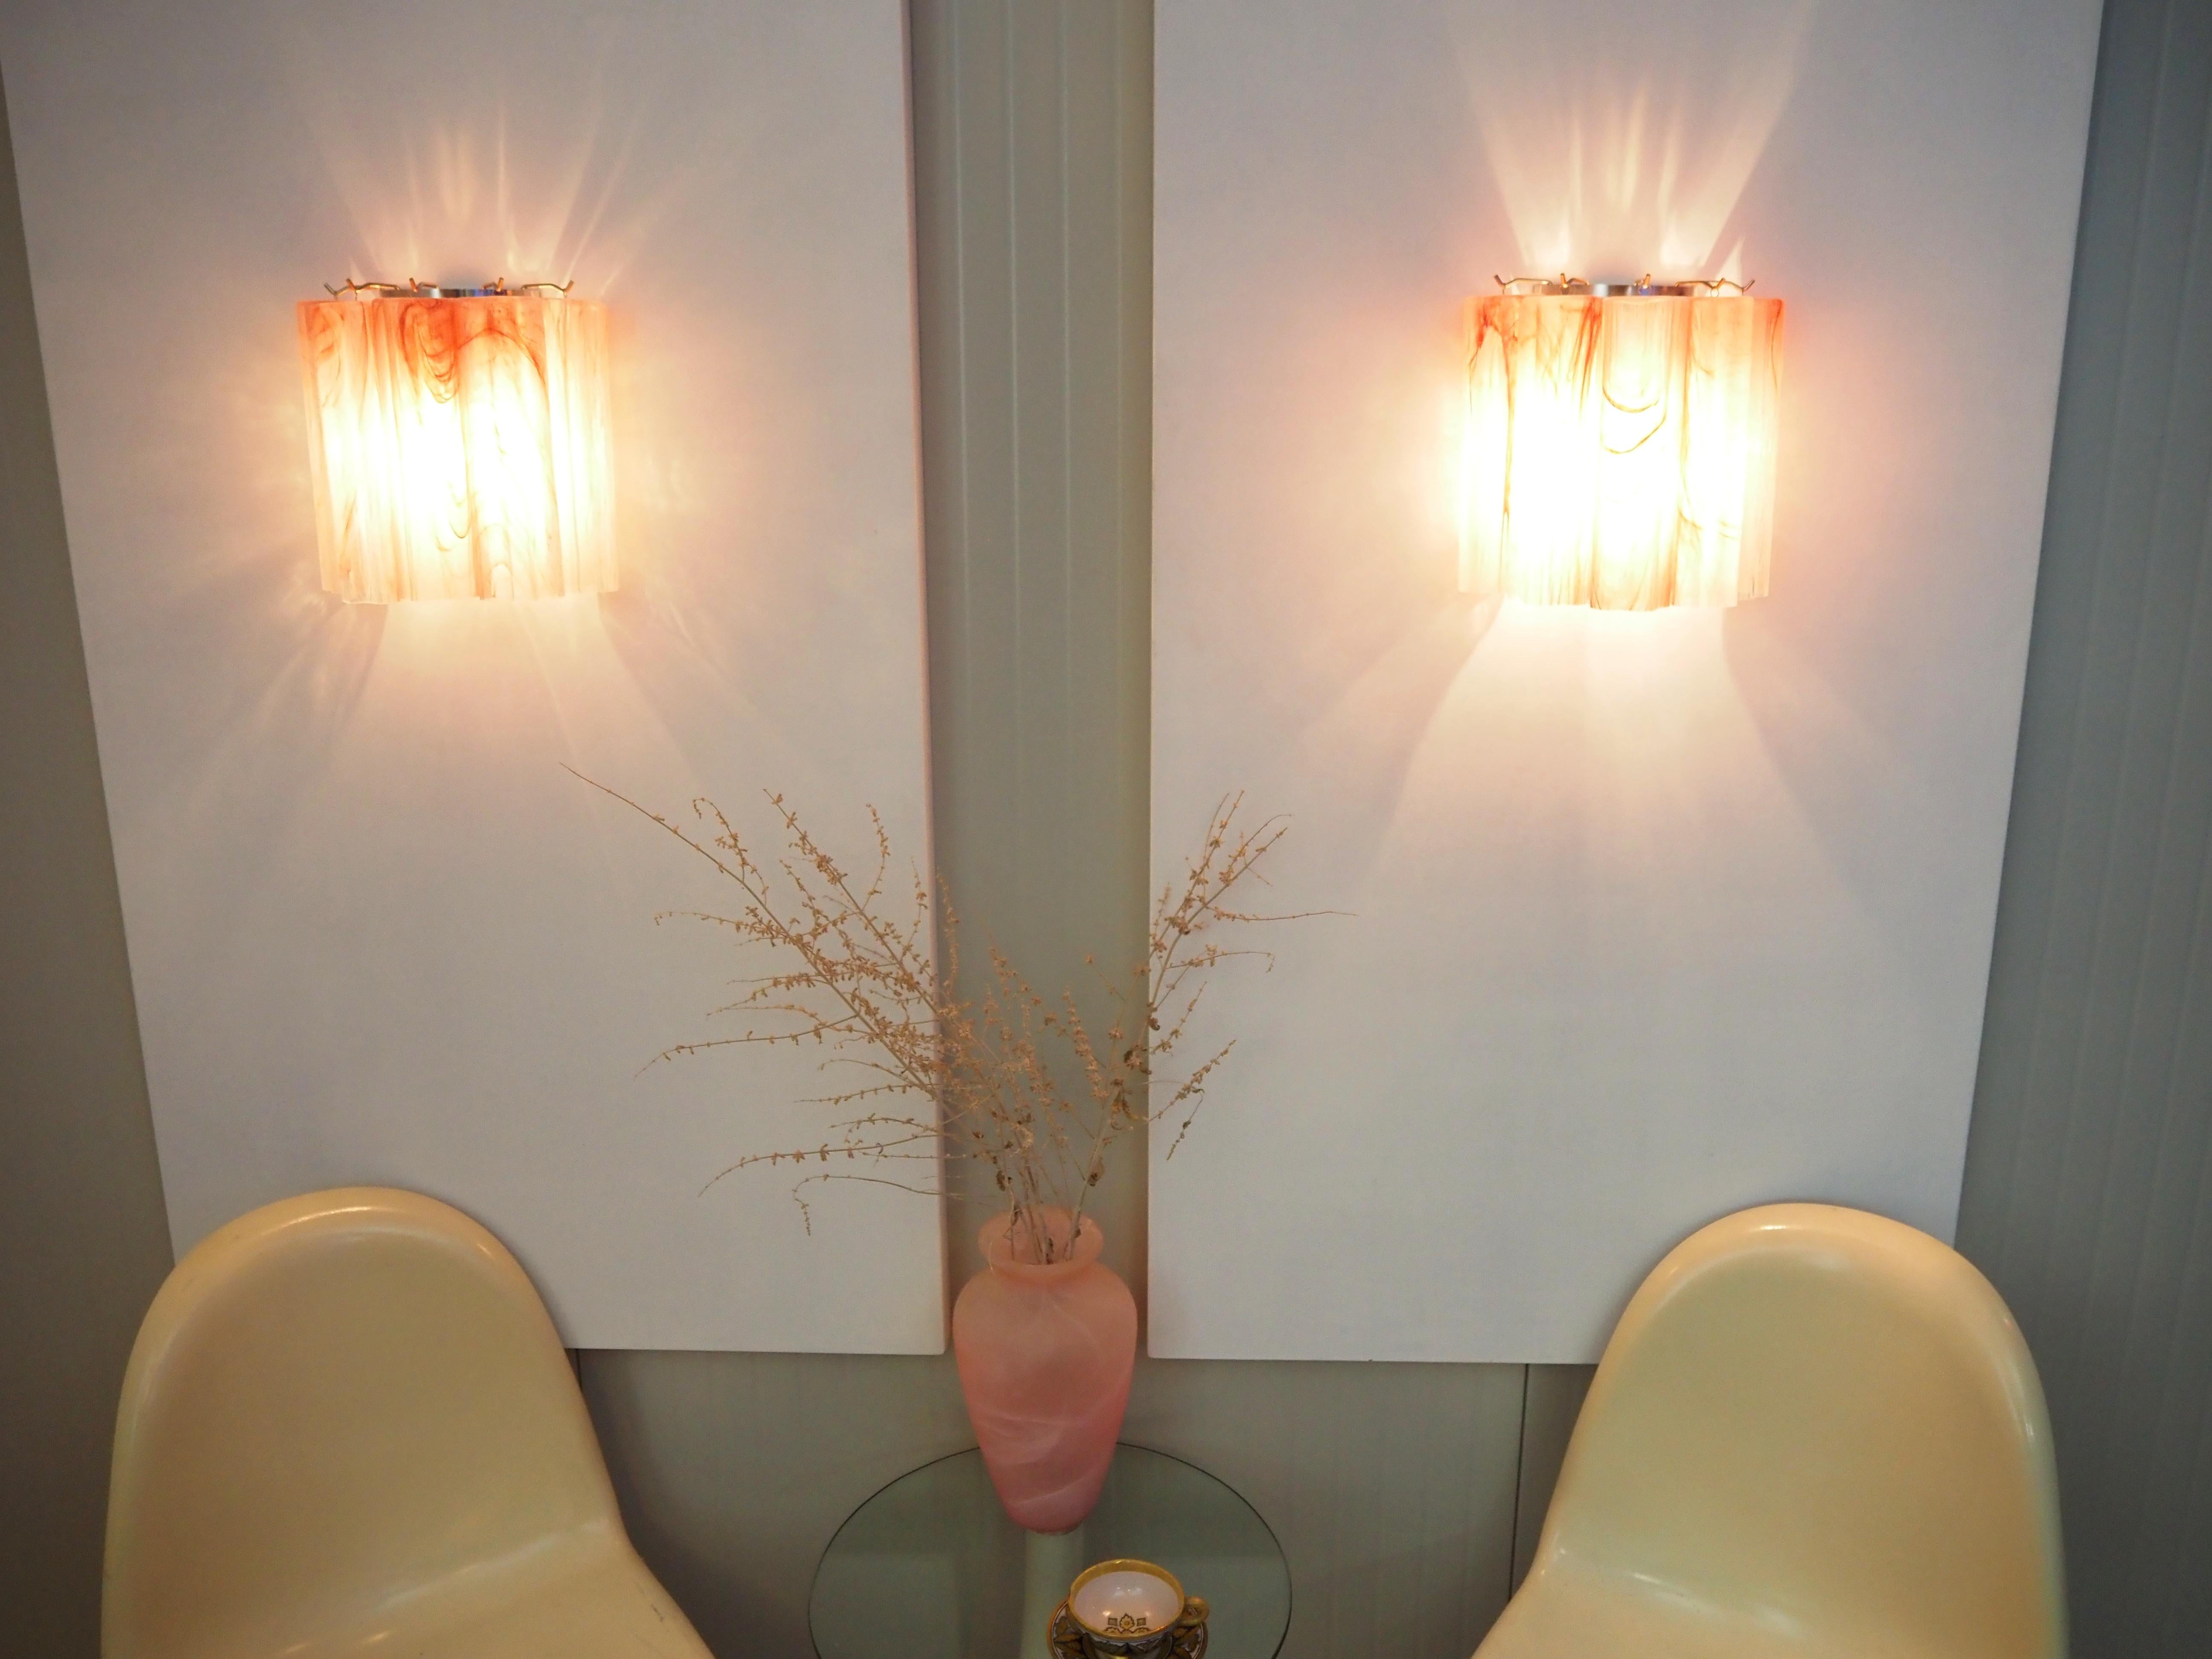 Galvanized Fantastic pair of Murano Glass Tube wall sconces - 5 pink alabaster glass tube